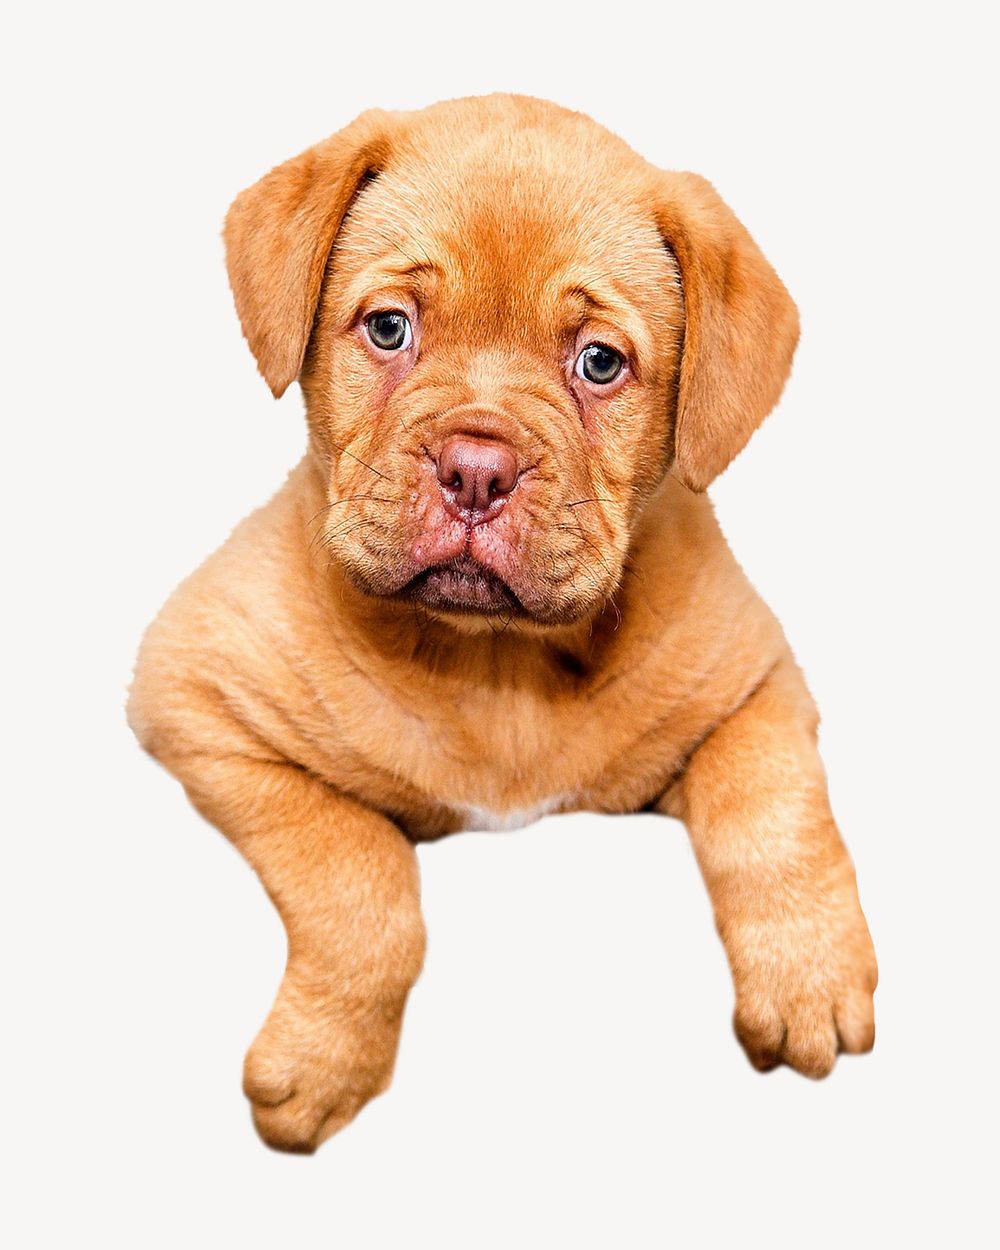 Cute puppy, isolated animal image psd